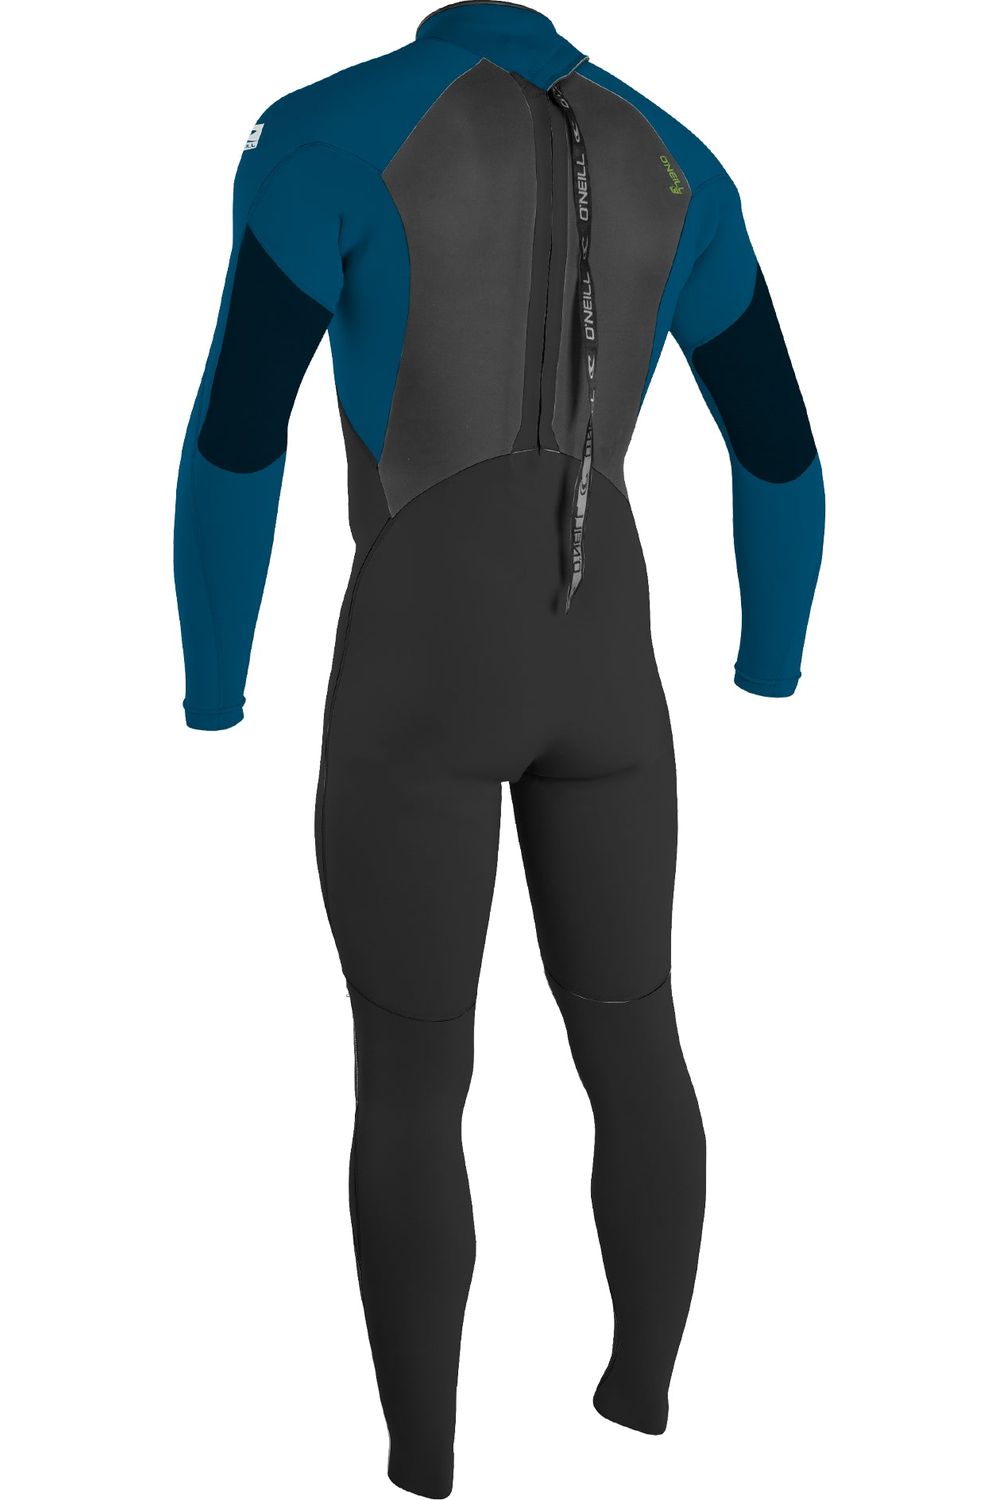 O'Neill Epic Youth 3/2 Wetsuit with Back Zip In Black & Blue